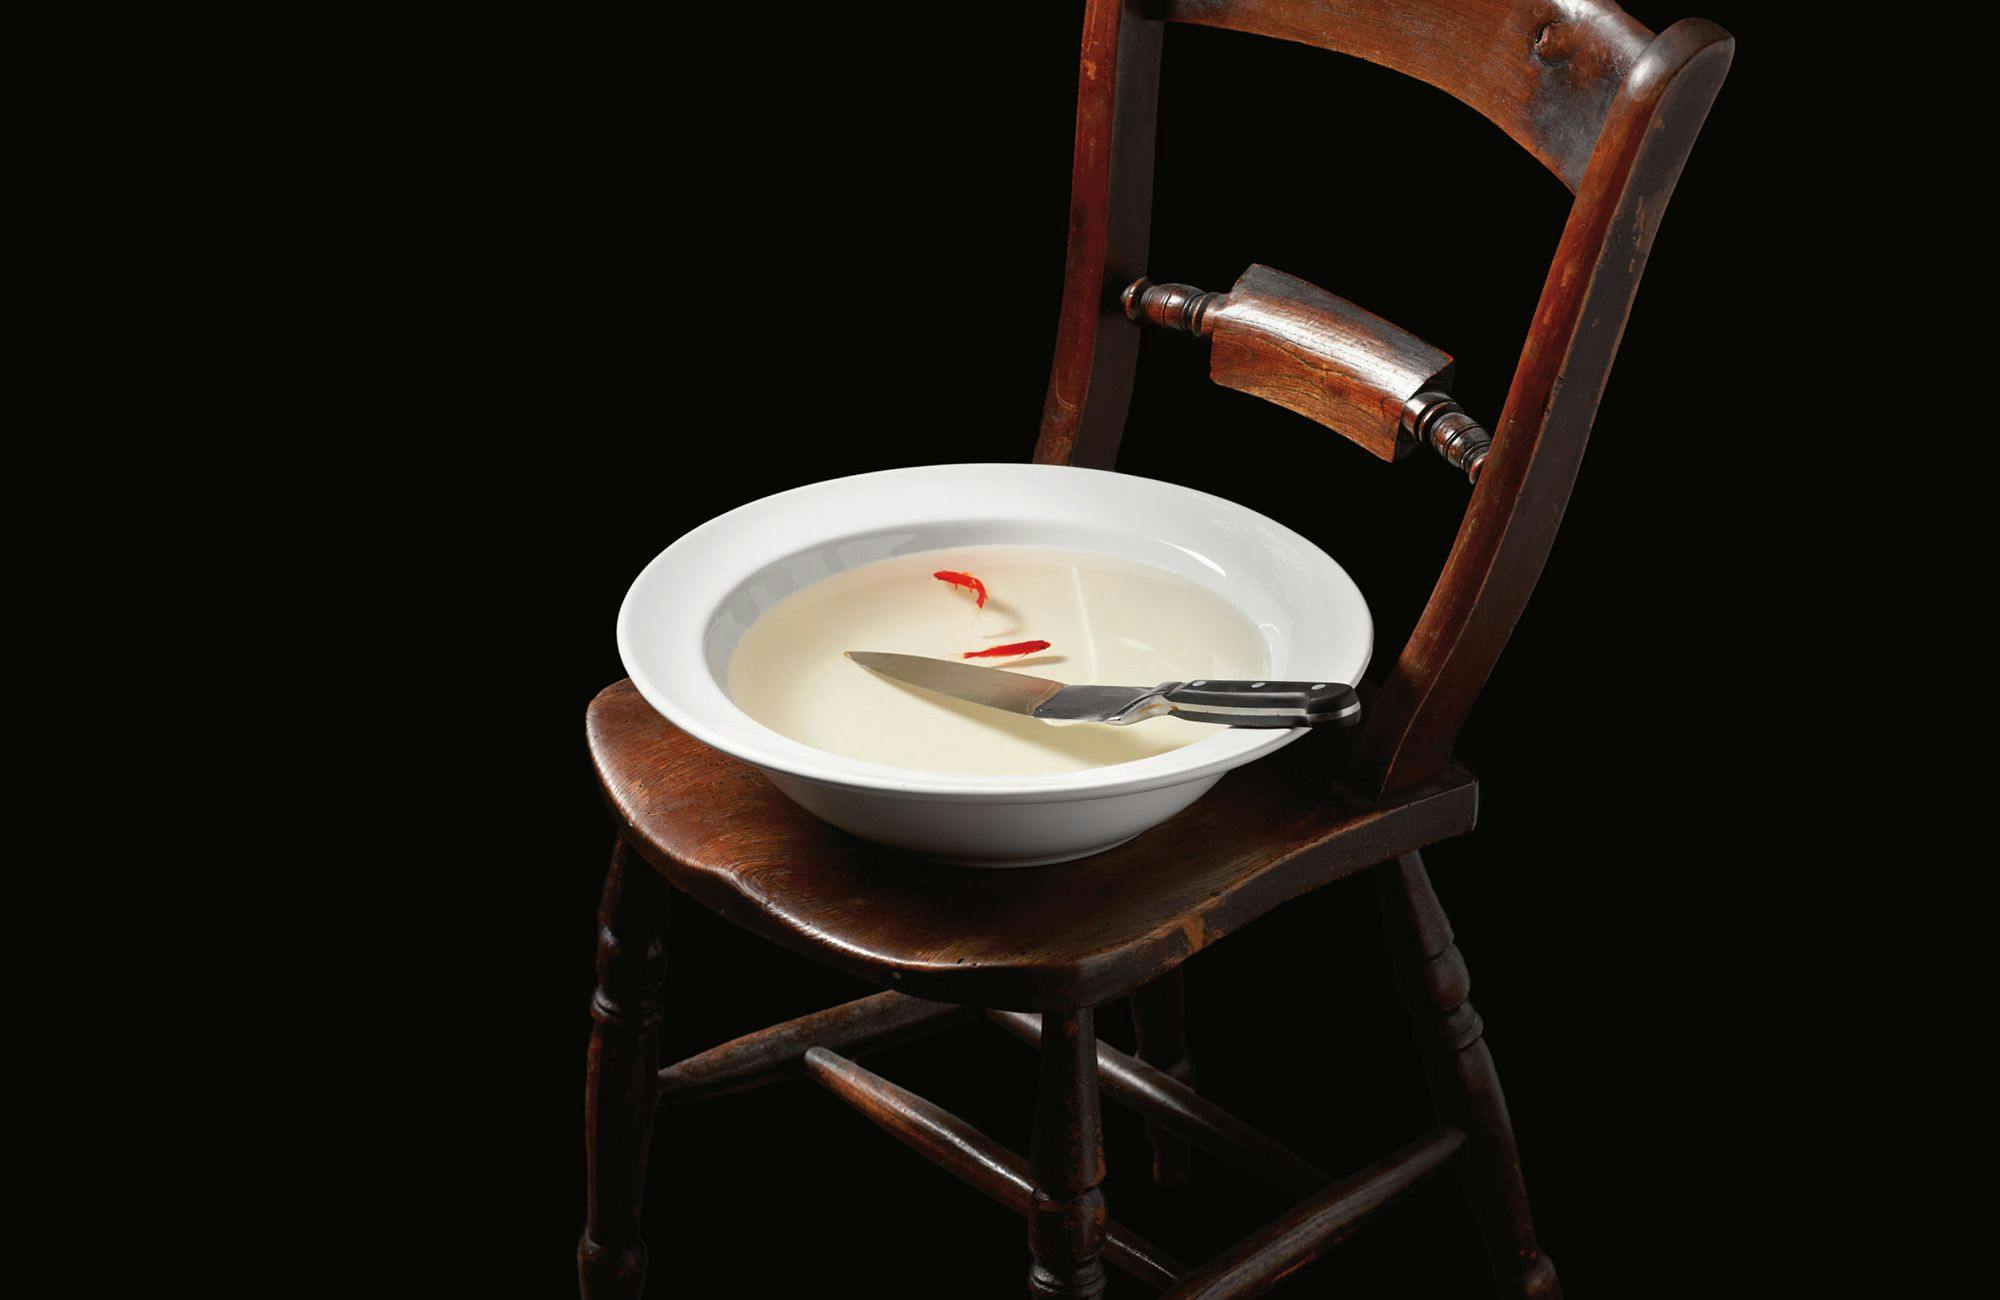 On a wooden chair sits a white bowl containing water, a knife and two gold fish.